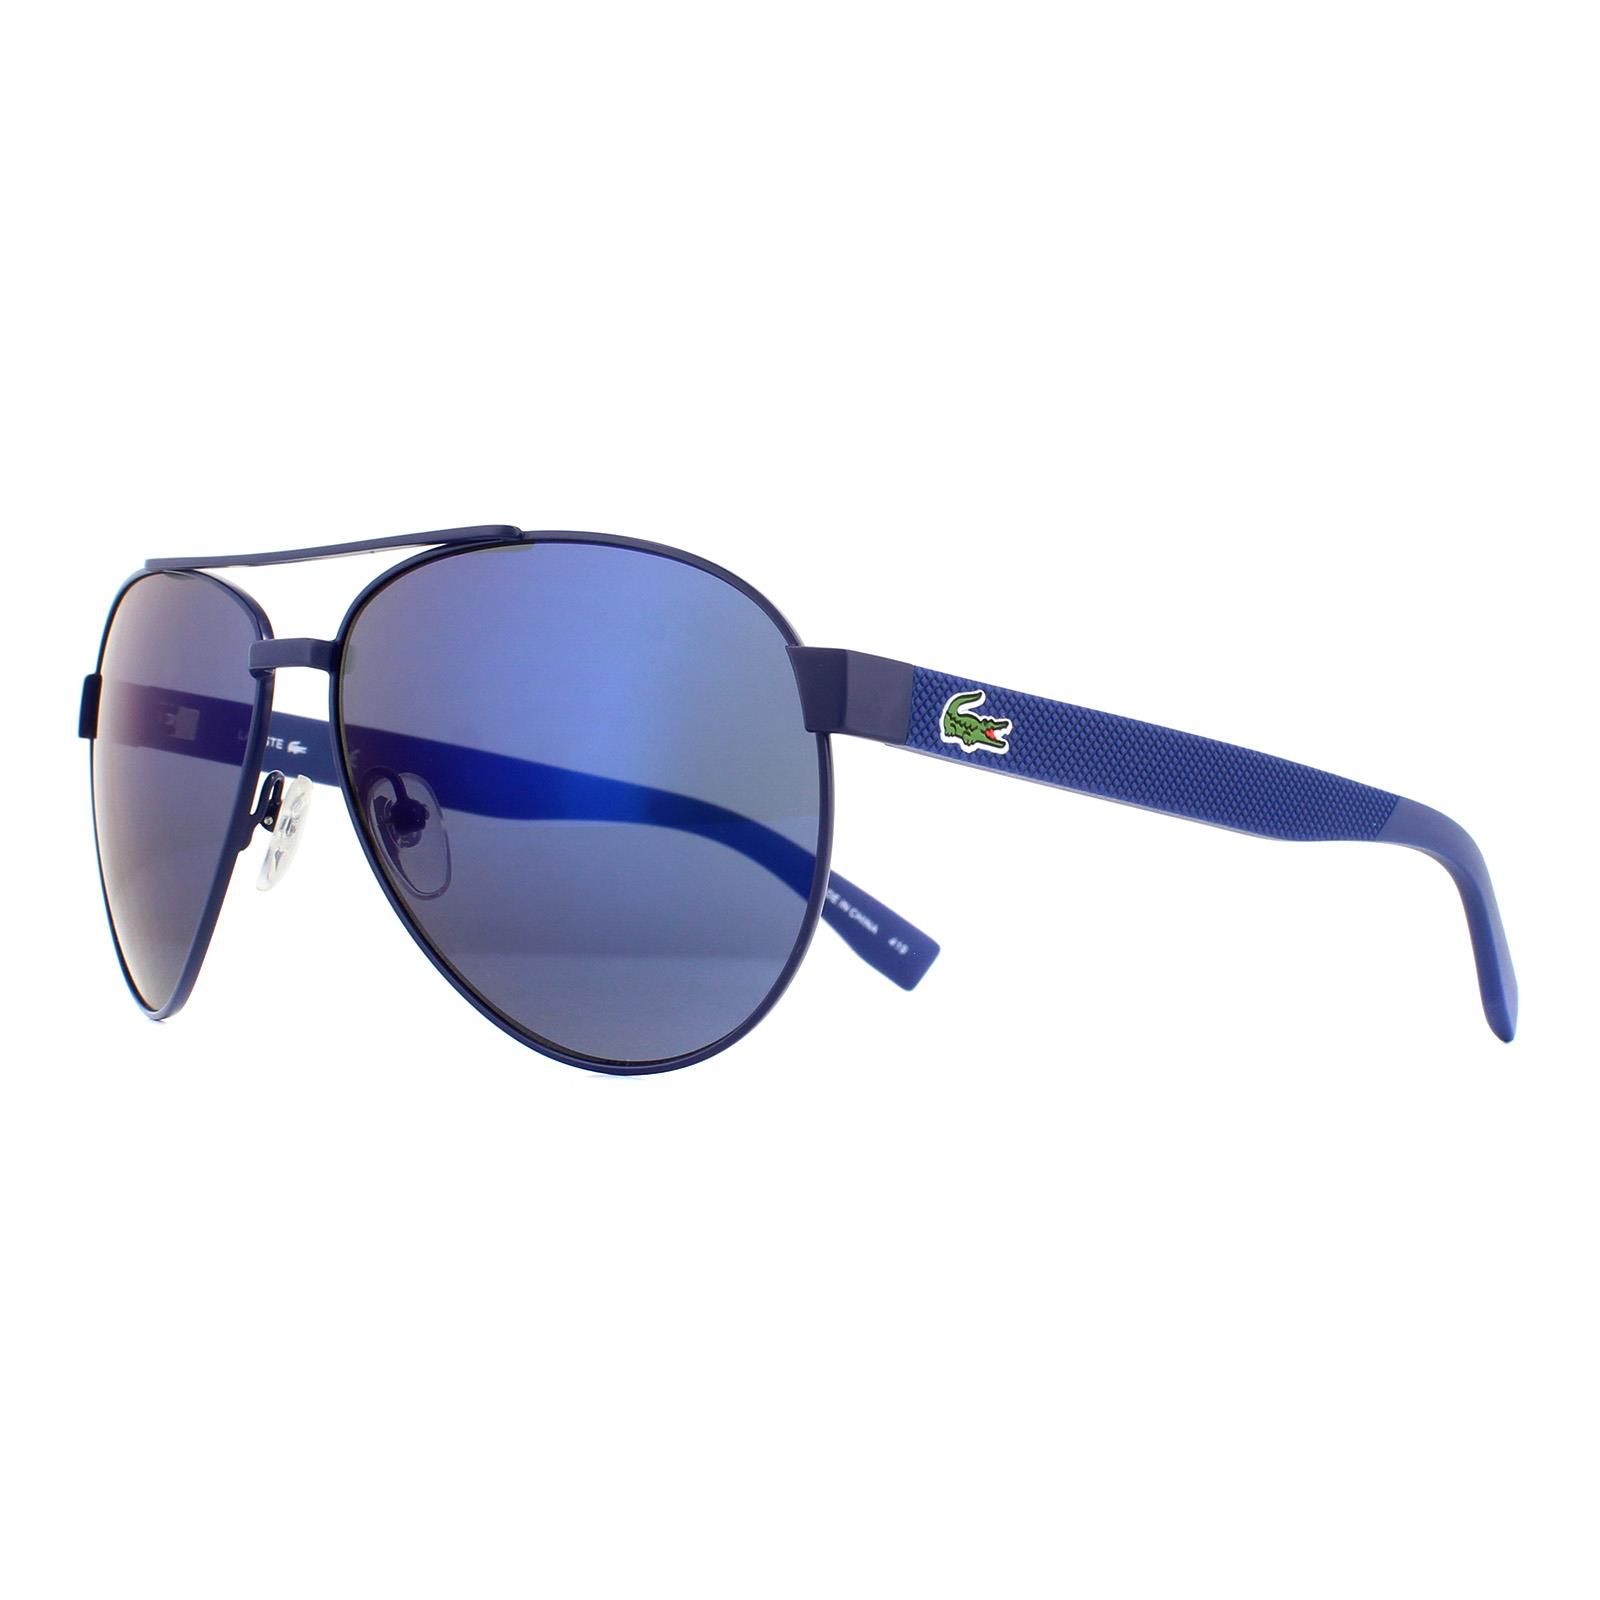 Lacoste Sunglasses L185S 424 Blue Blue are a classic pilot style with double bridge and thick plastic arms featuring the ubiquitous Lacoste alligator logo at the temples.